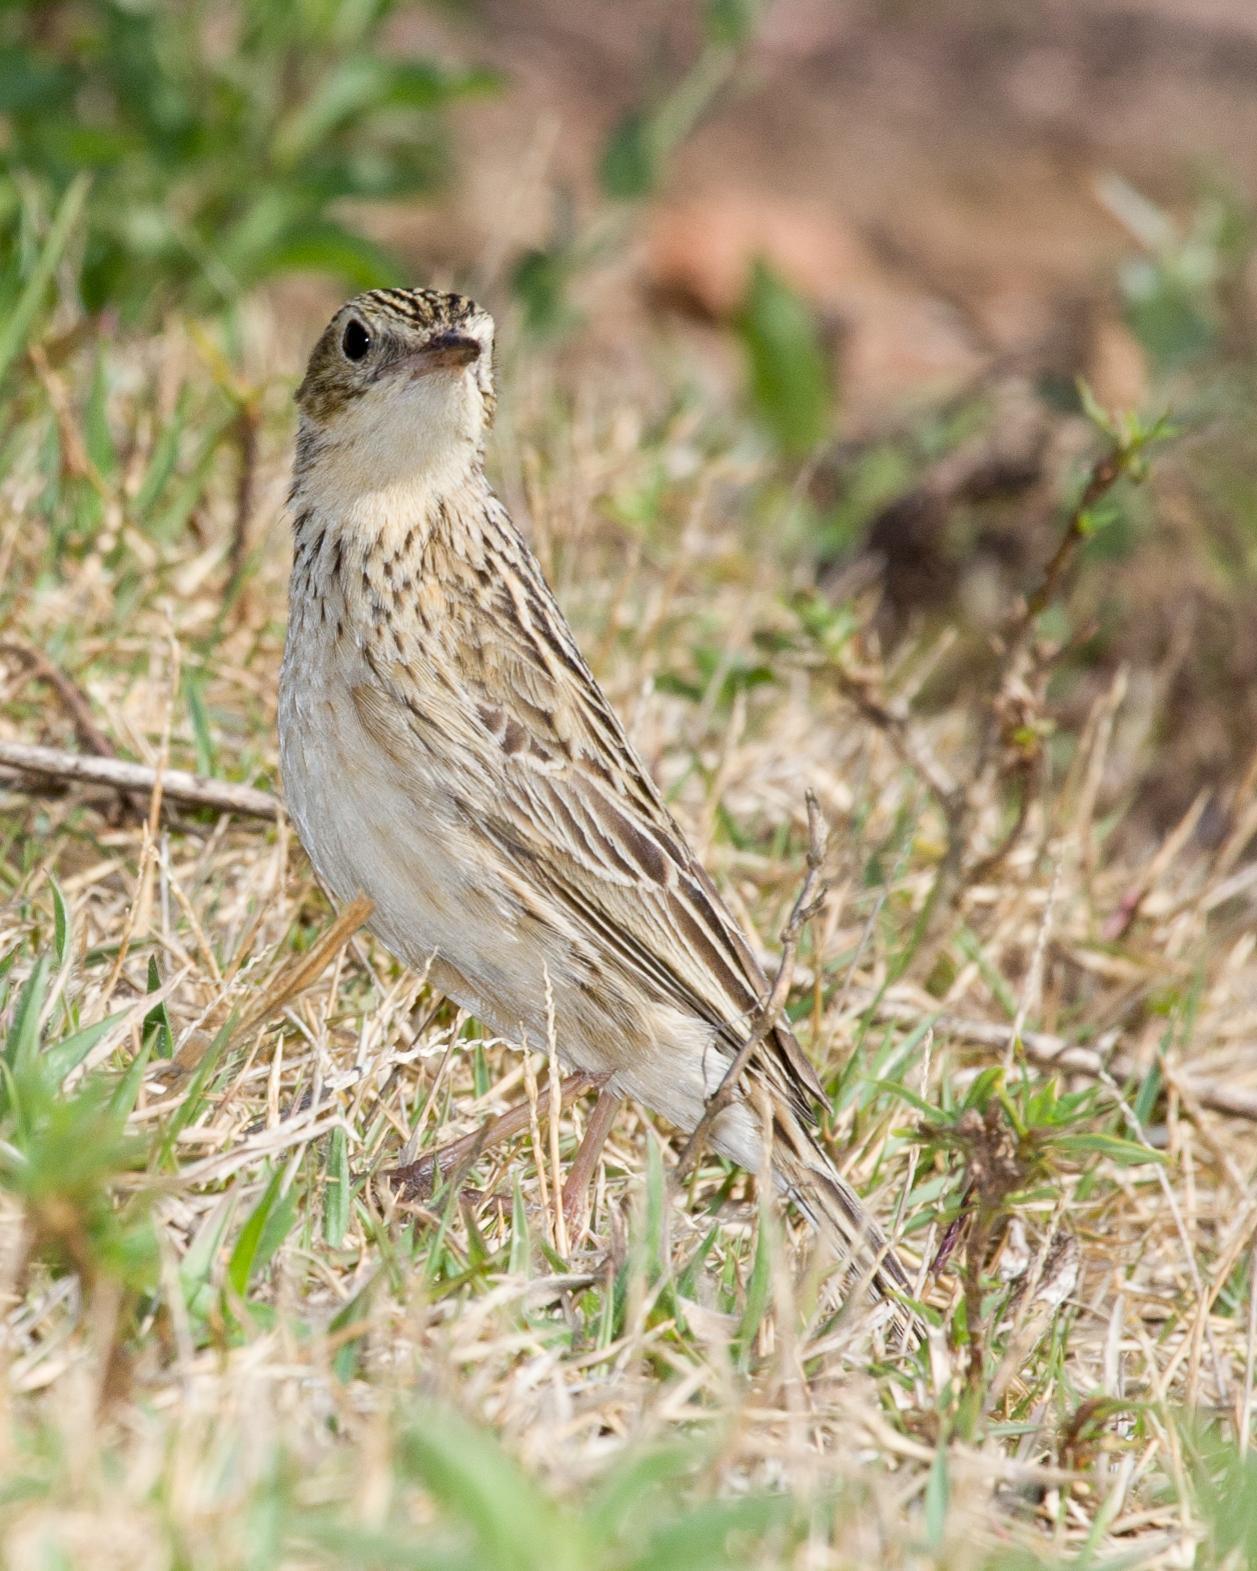 Hellmayr's Pipit Photo by Robert Lewis